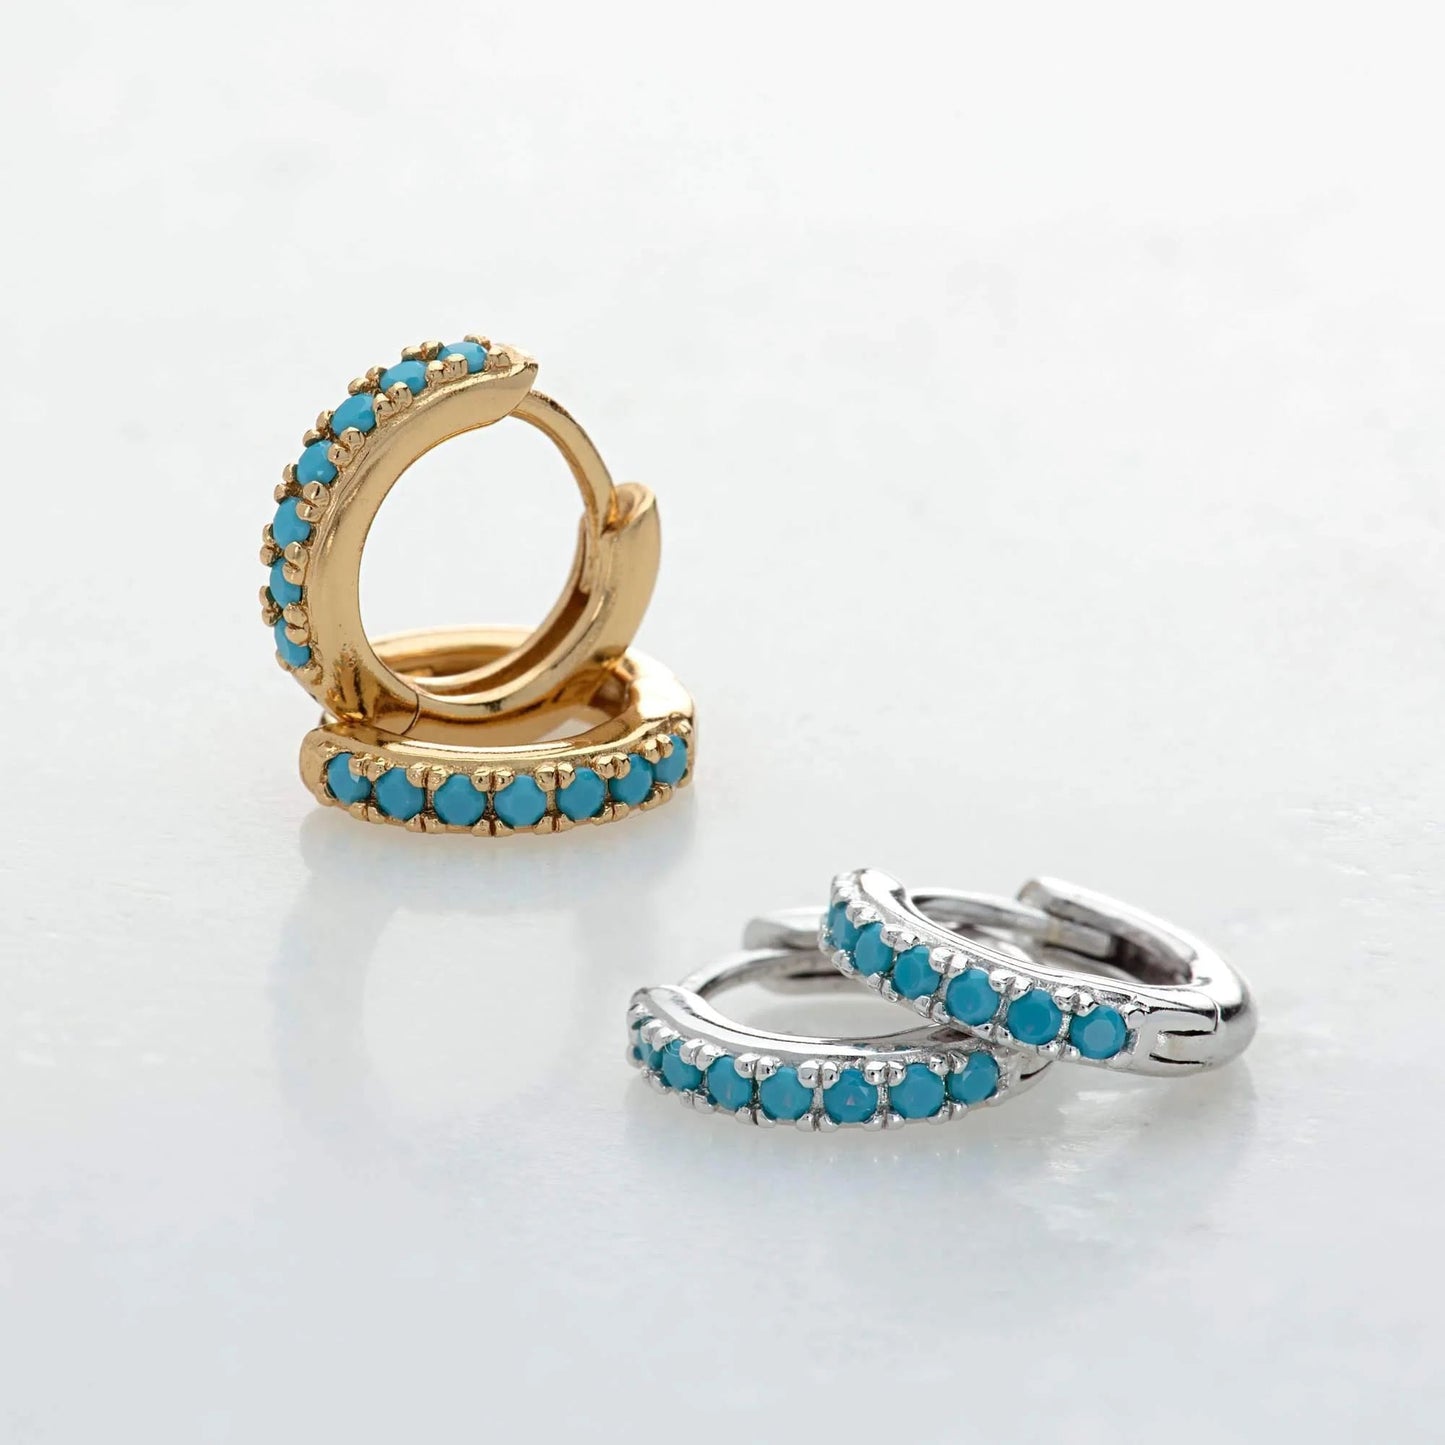 Gold and silver Row Huggies Earrings with turquoise stones on grey background - IceGlint